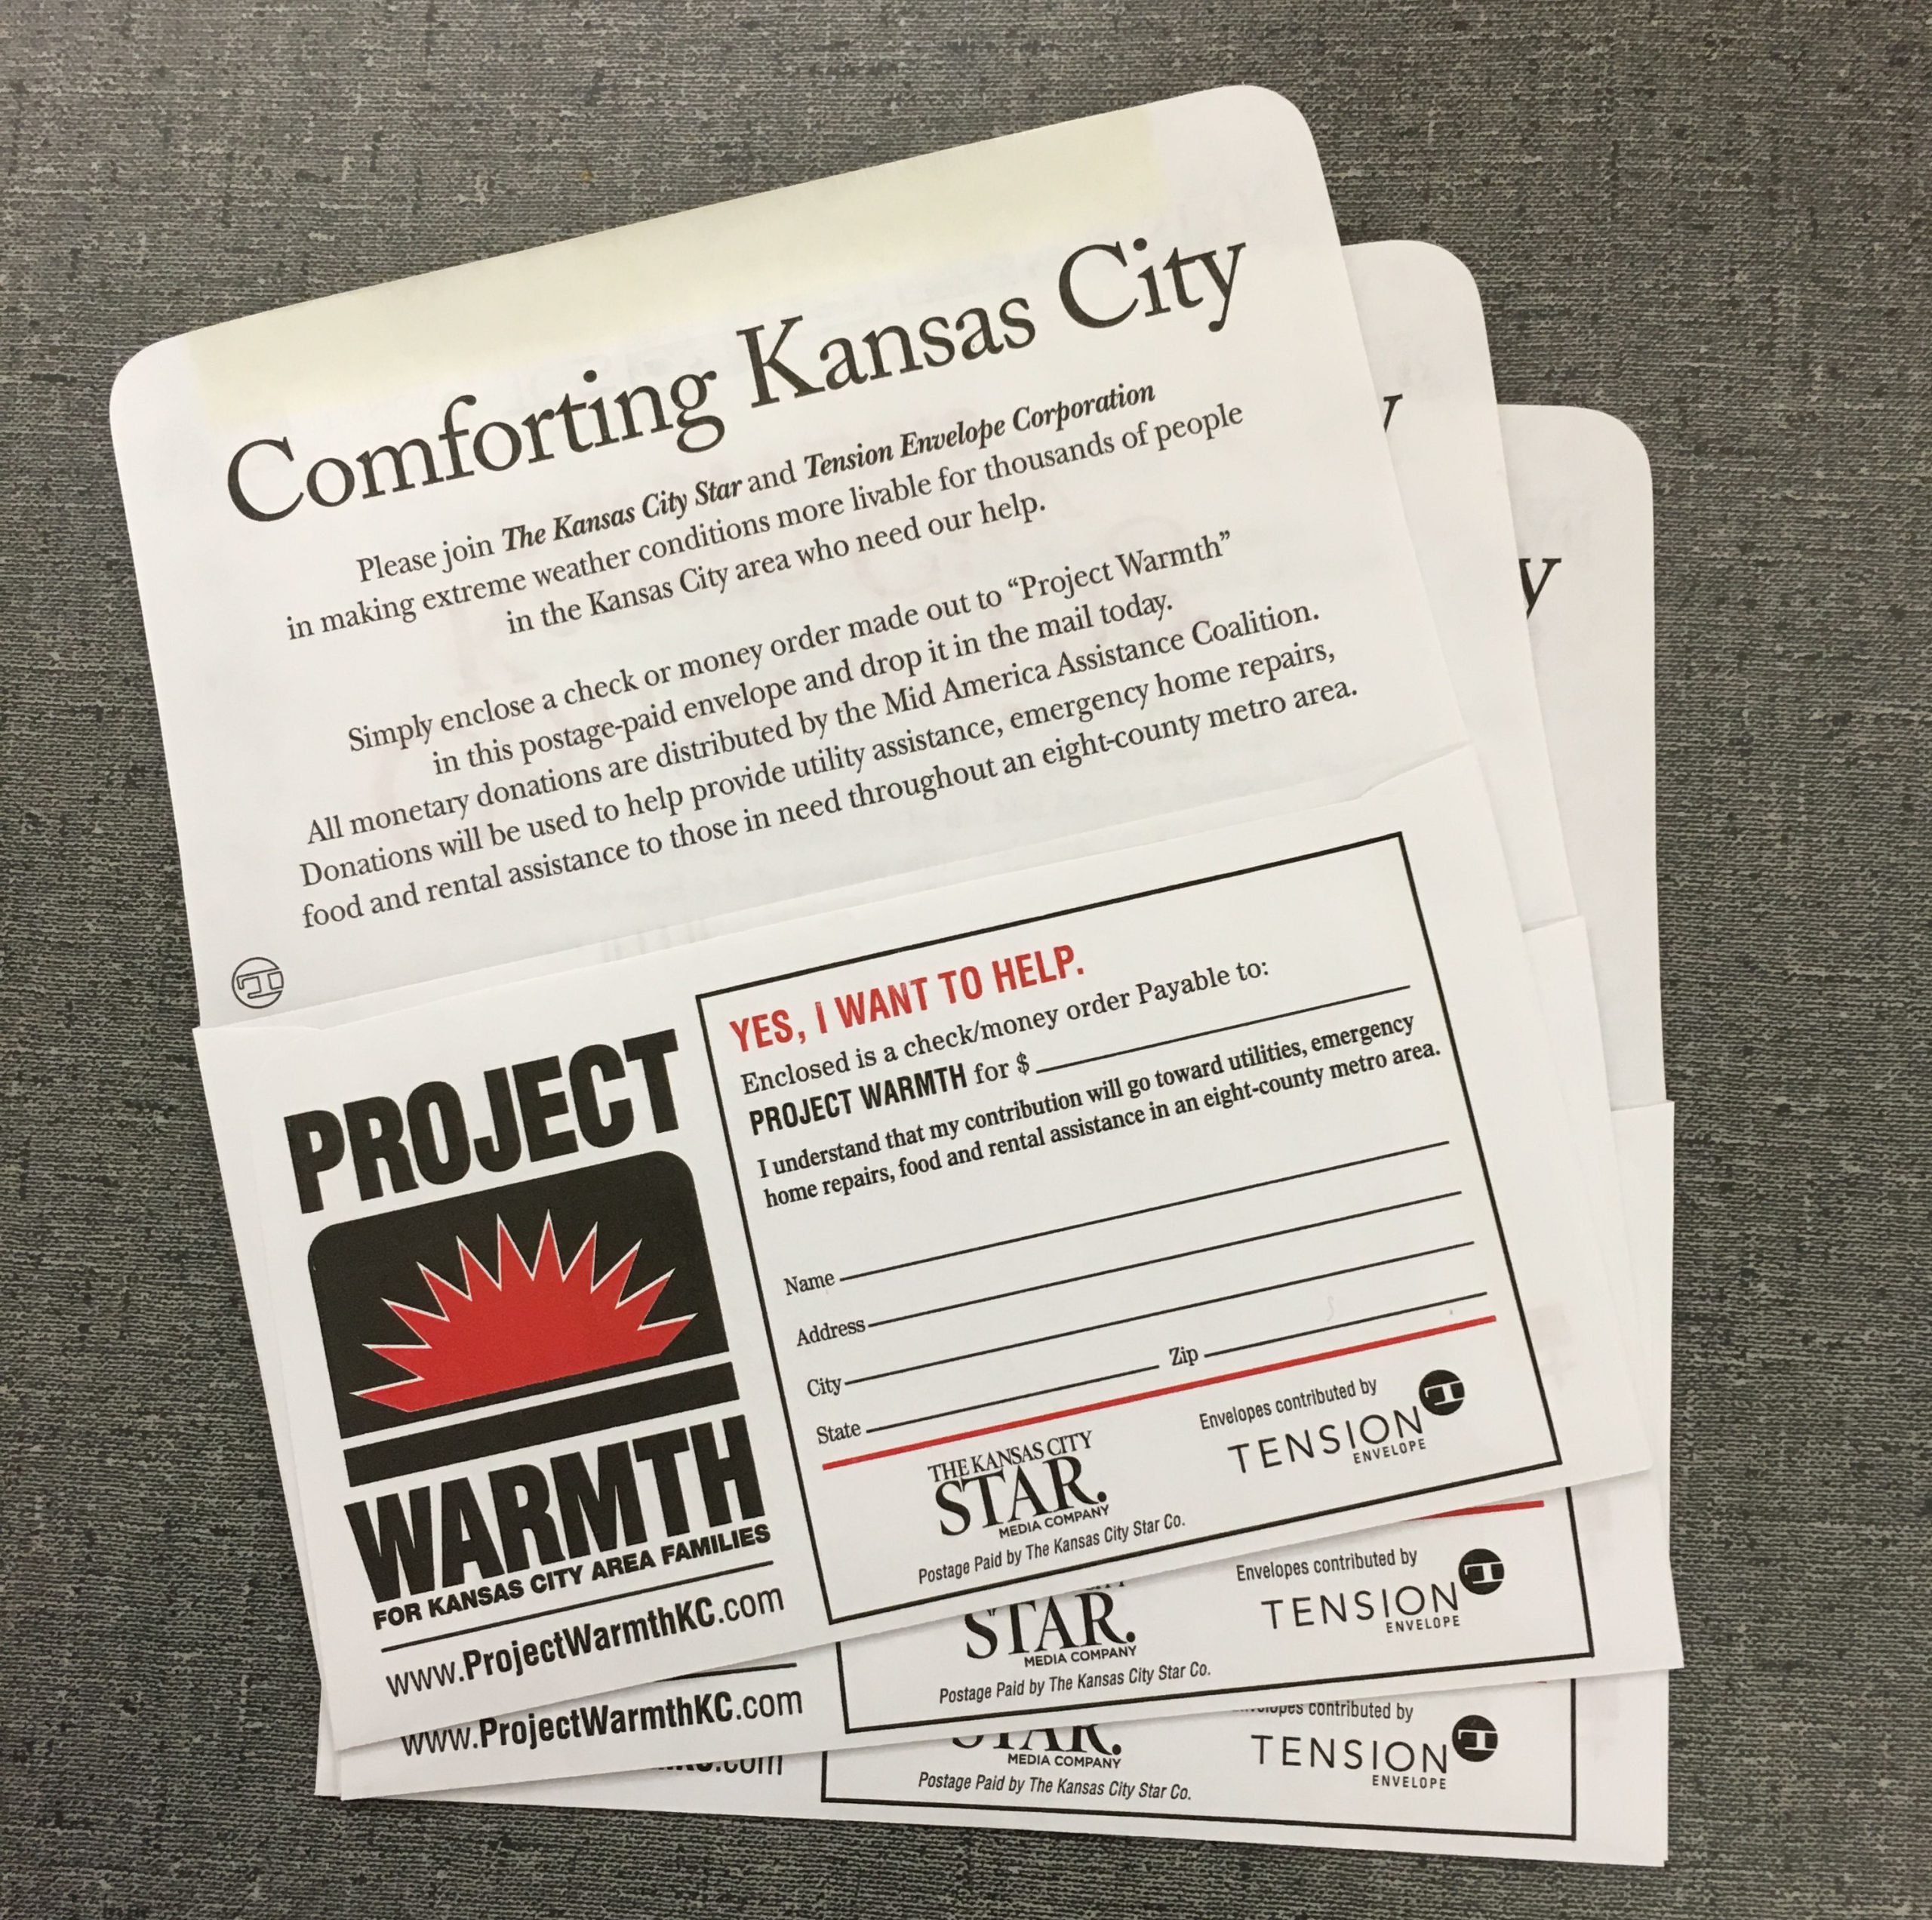 Tension Corporation Helps Project Warmth Provide Comfort for Those in Need